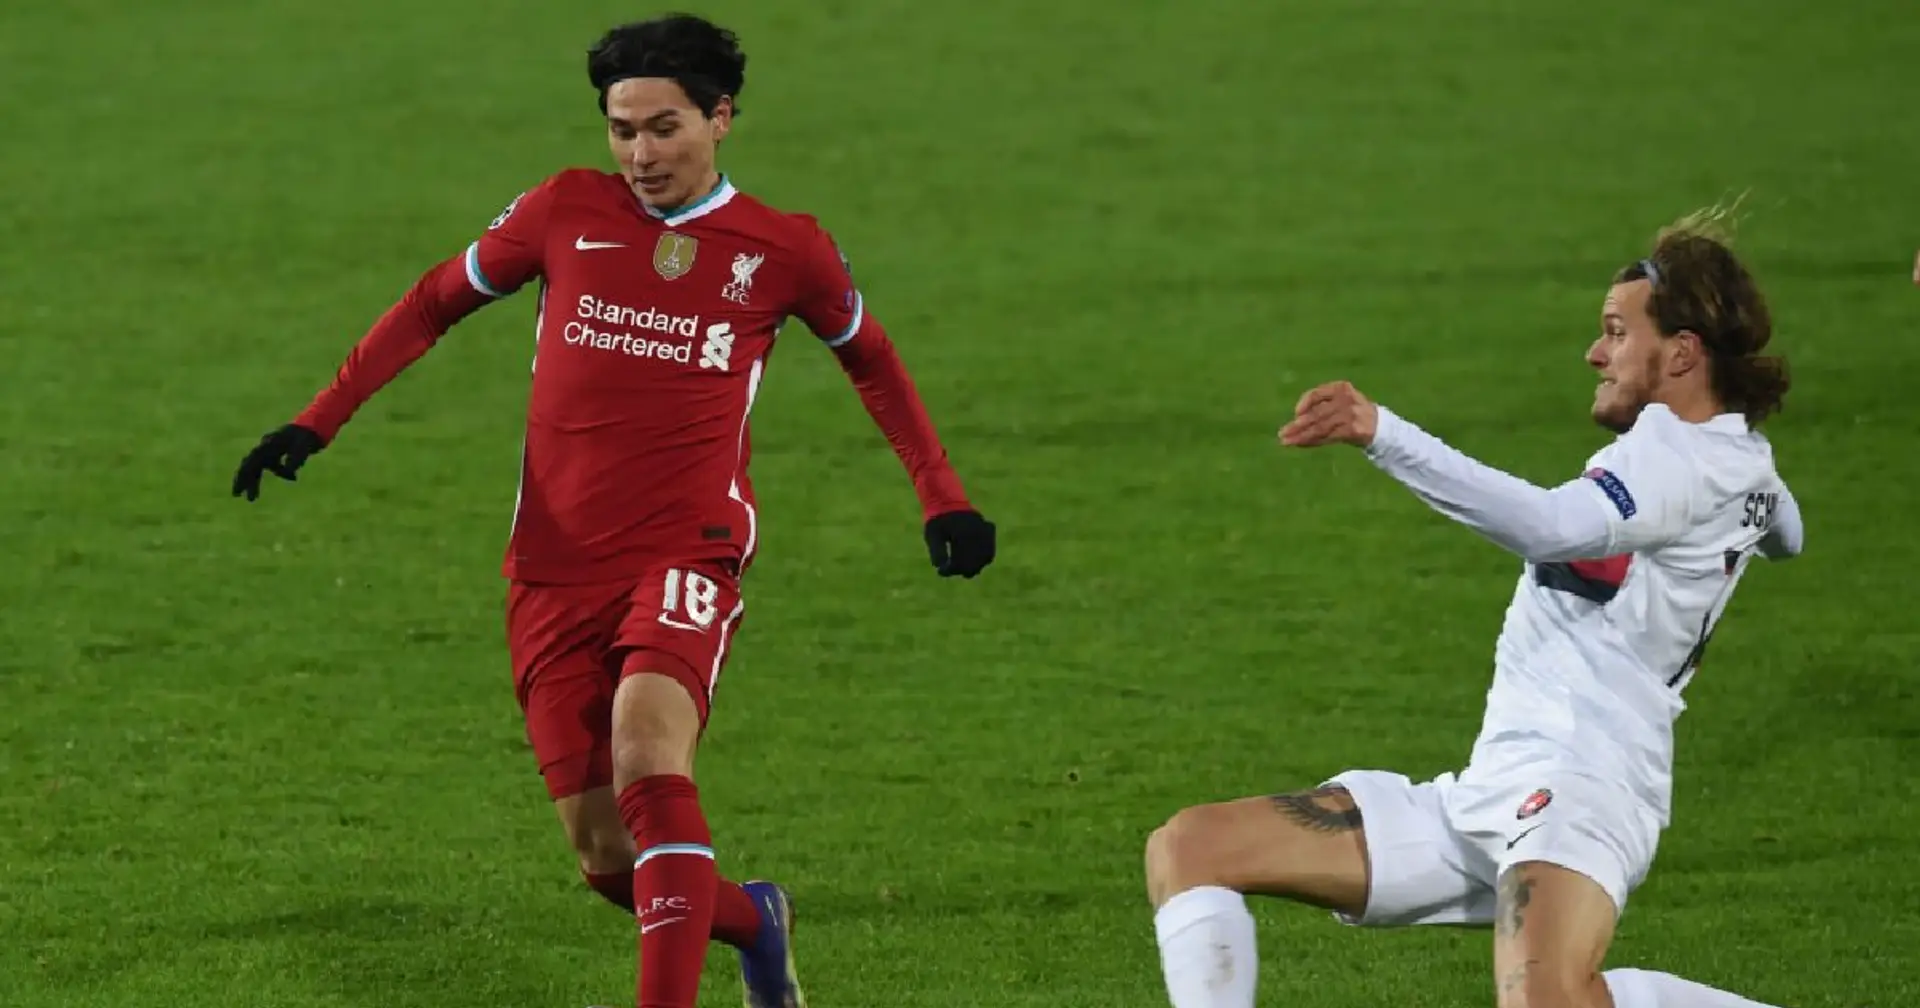 'Too easily pushed off, needs to bulk up': LFC fan community reacts to Minamino's performance